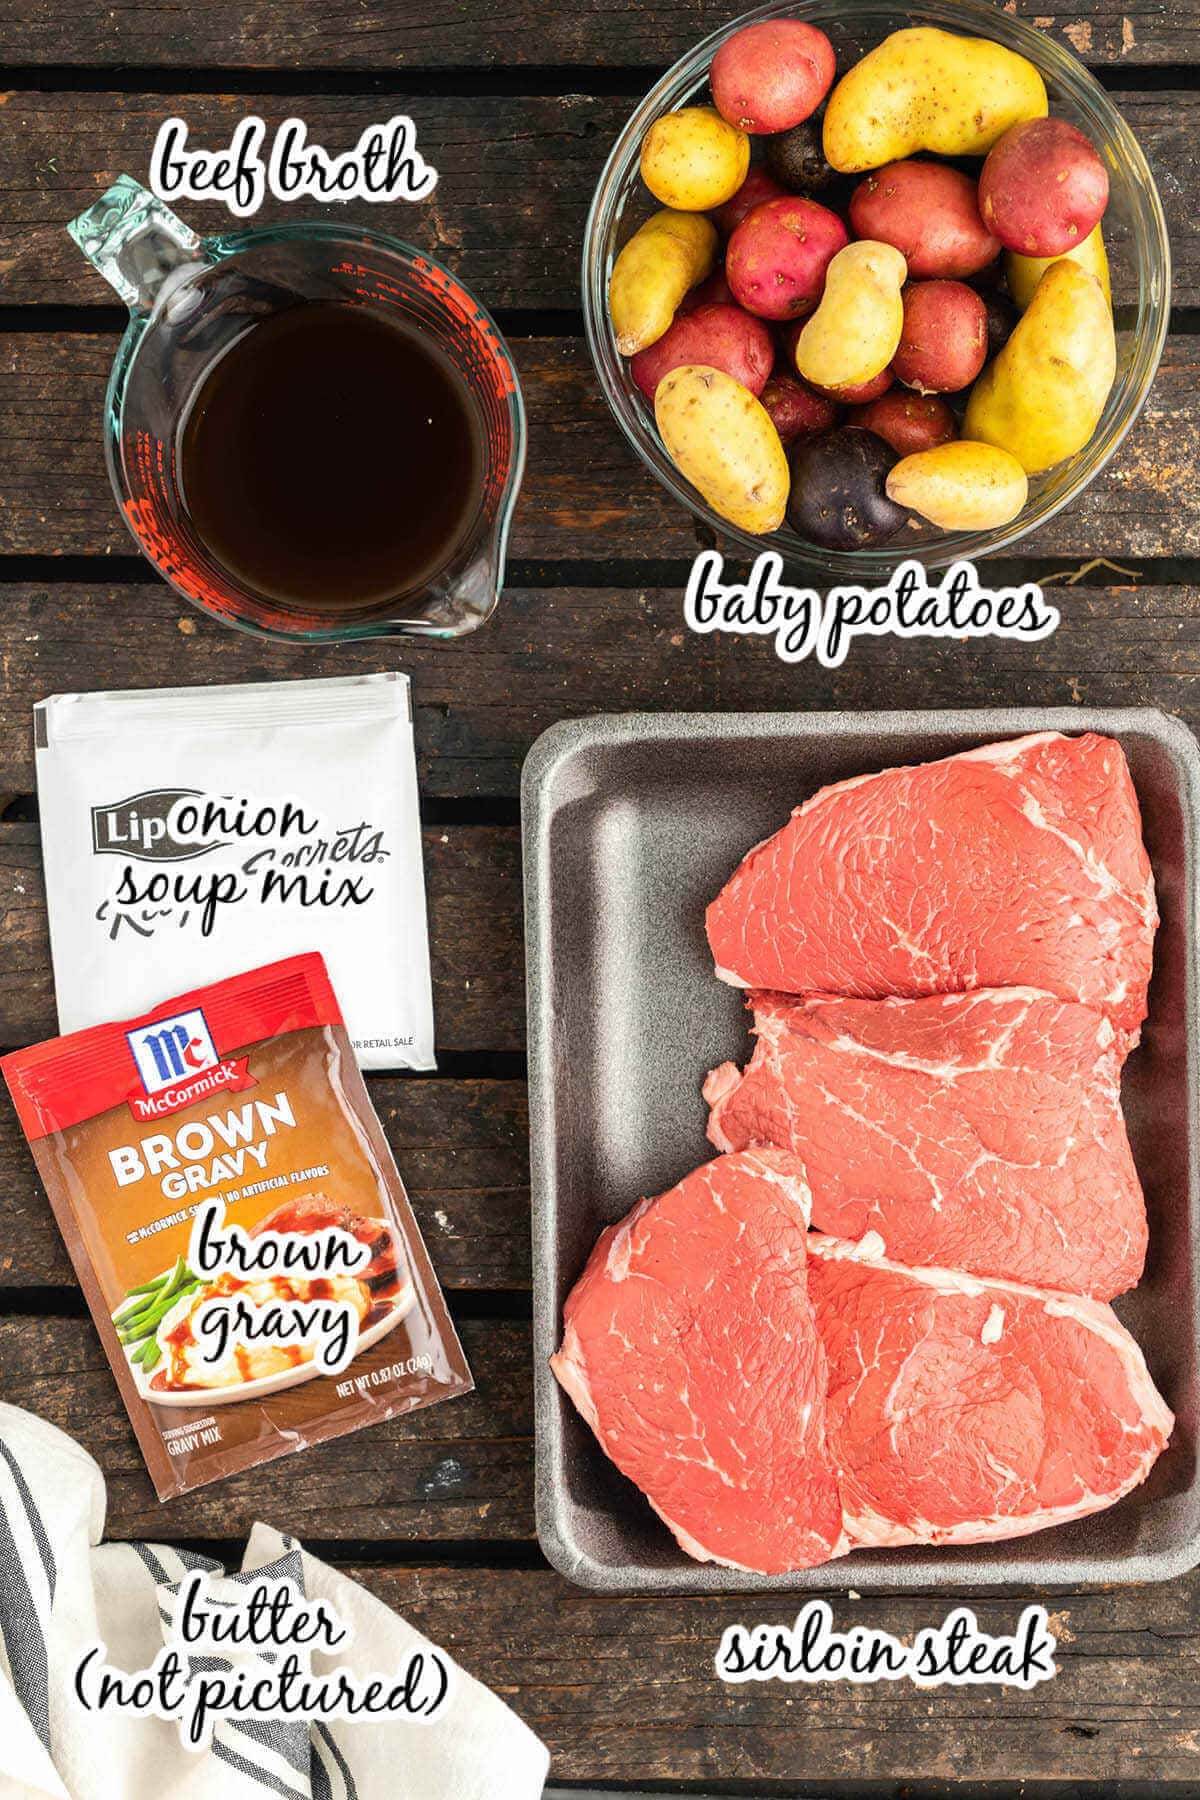 Ingredients needed to make crock pot steak and potatoes recipe. With print overlay.